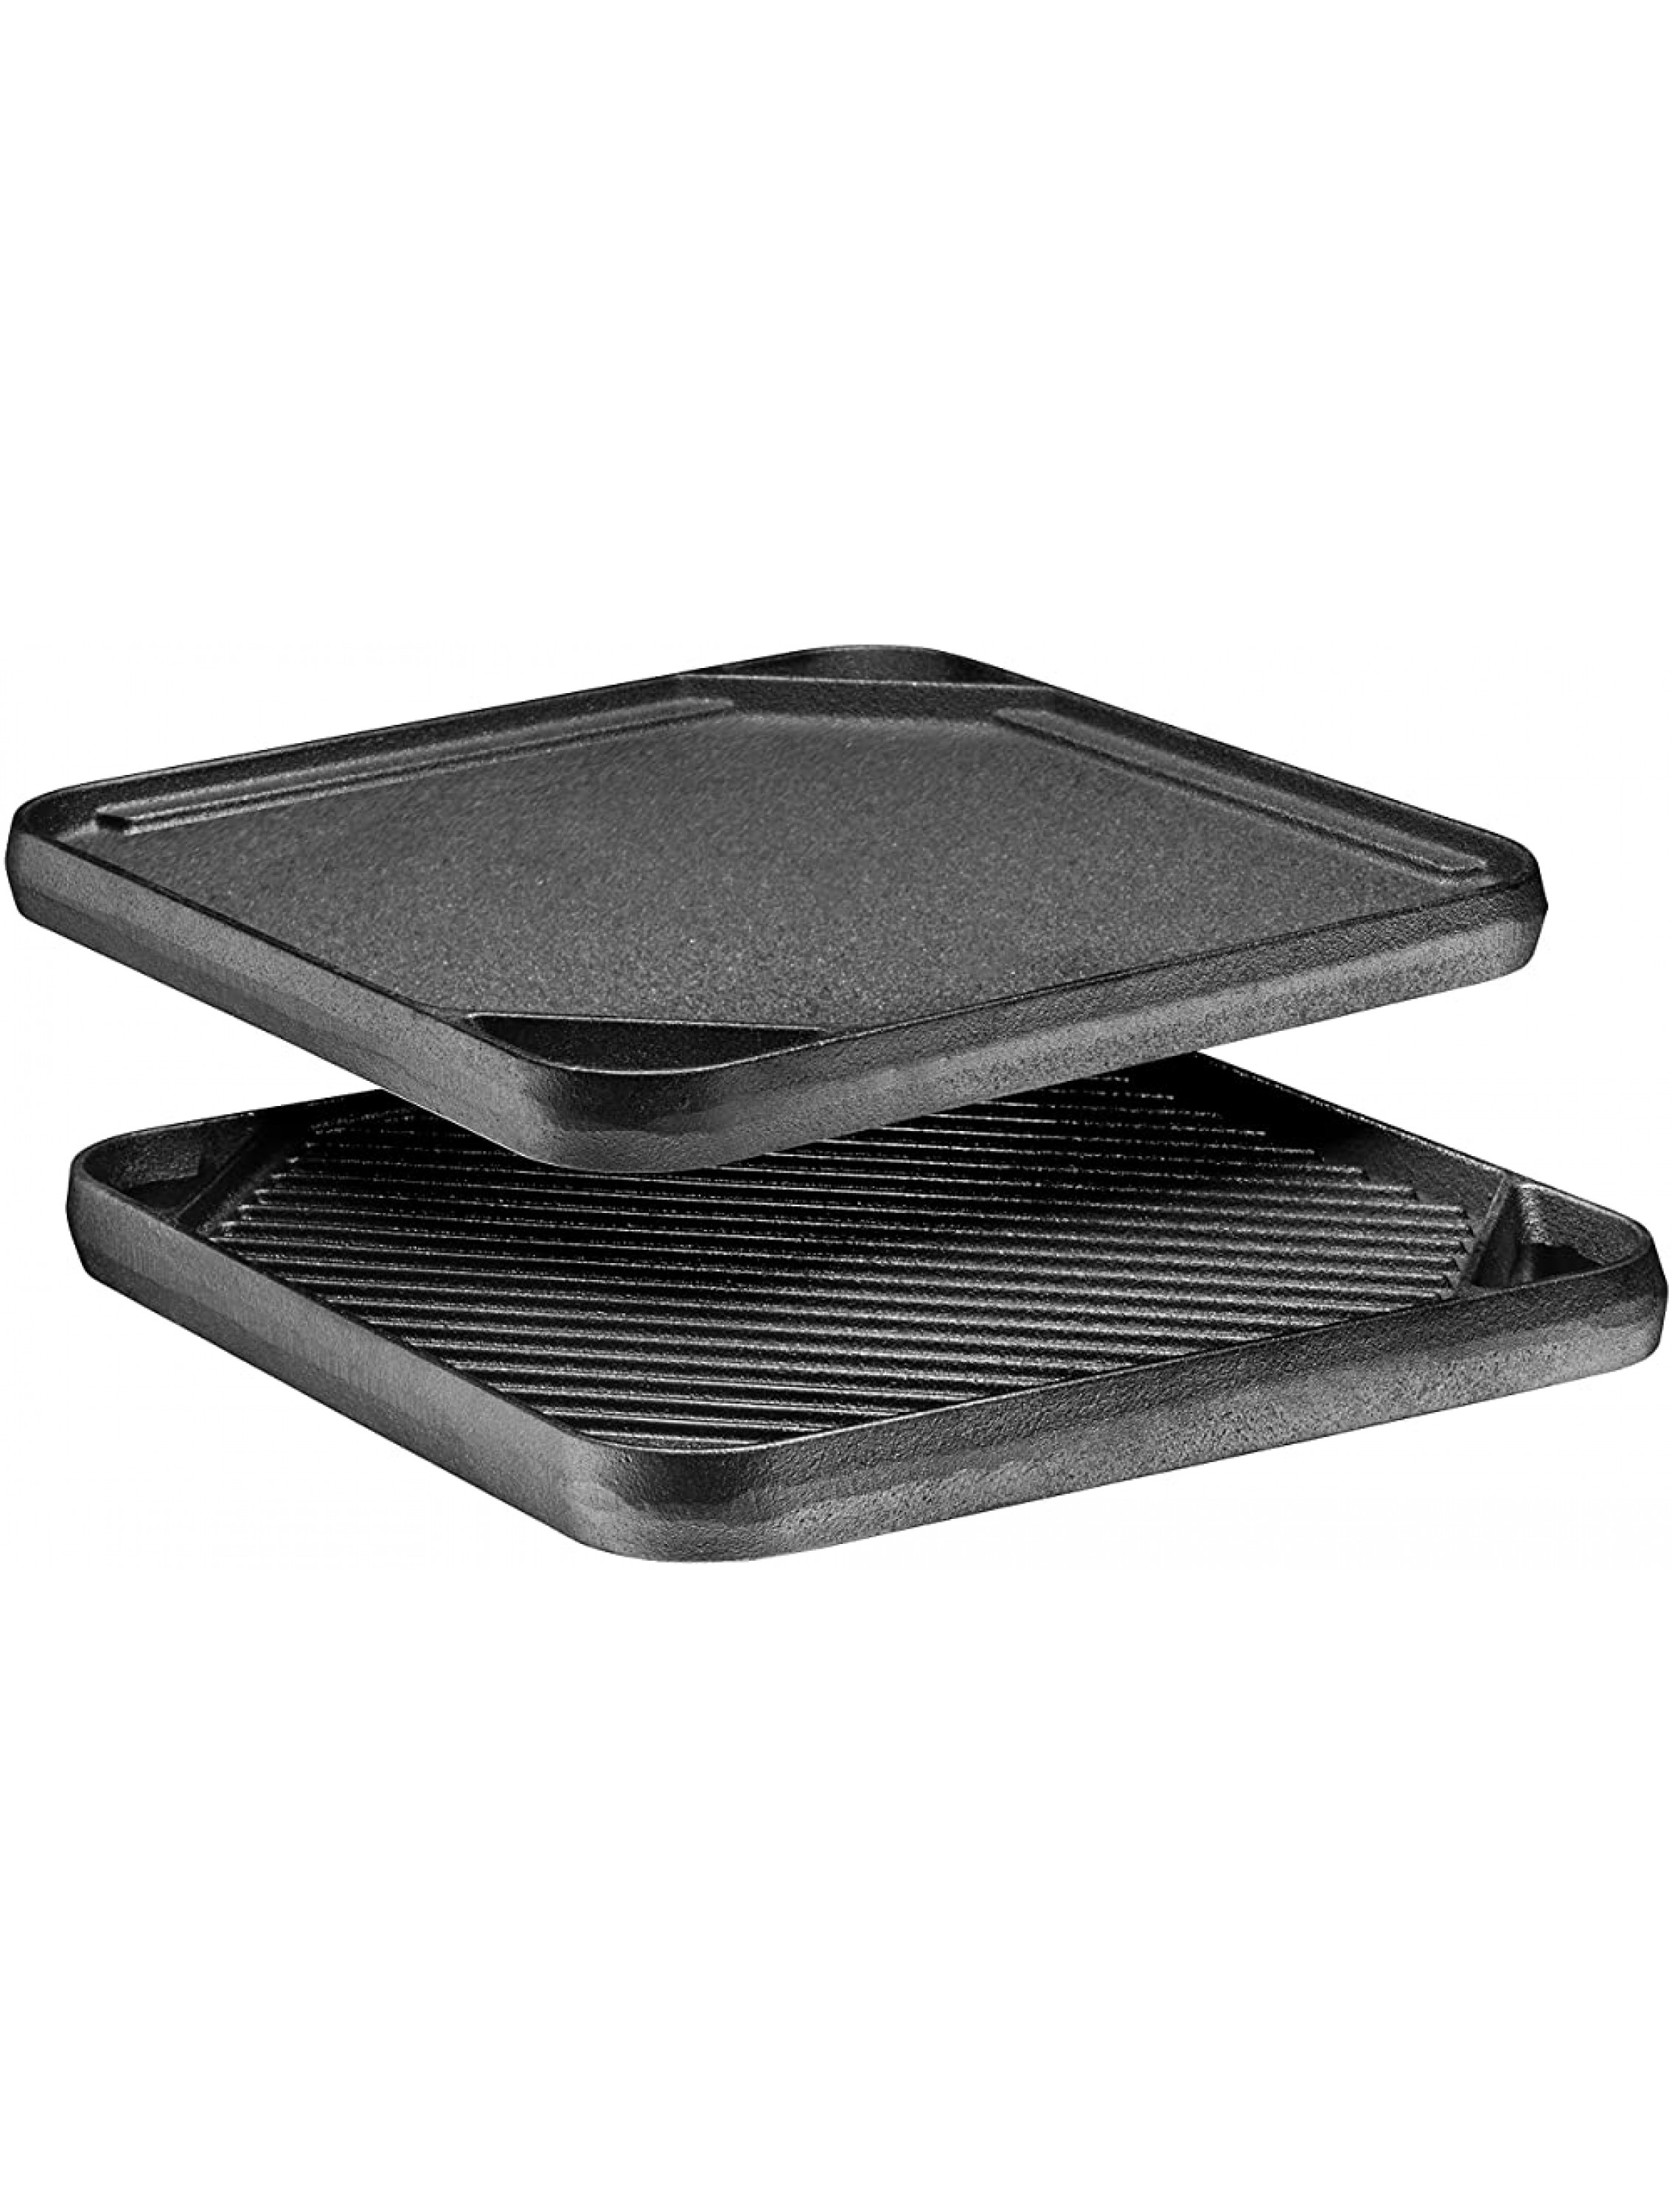 Bruntmor Gas Stovetop Pre-Seasoned Square Cast Iron Reversible Grill Griddle Pan 10 x 10 Skillet with Dual Handles Durable Frying Pan Camping Skillet Oven and Grill safe w Grill & Smooth Side. - BTJXNAGU3